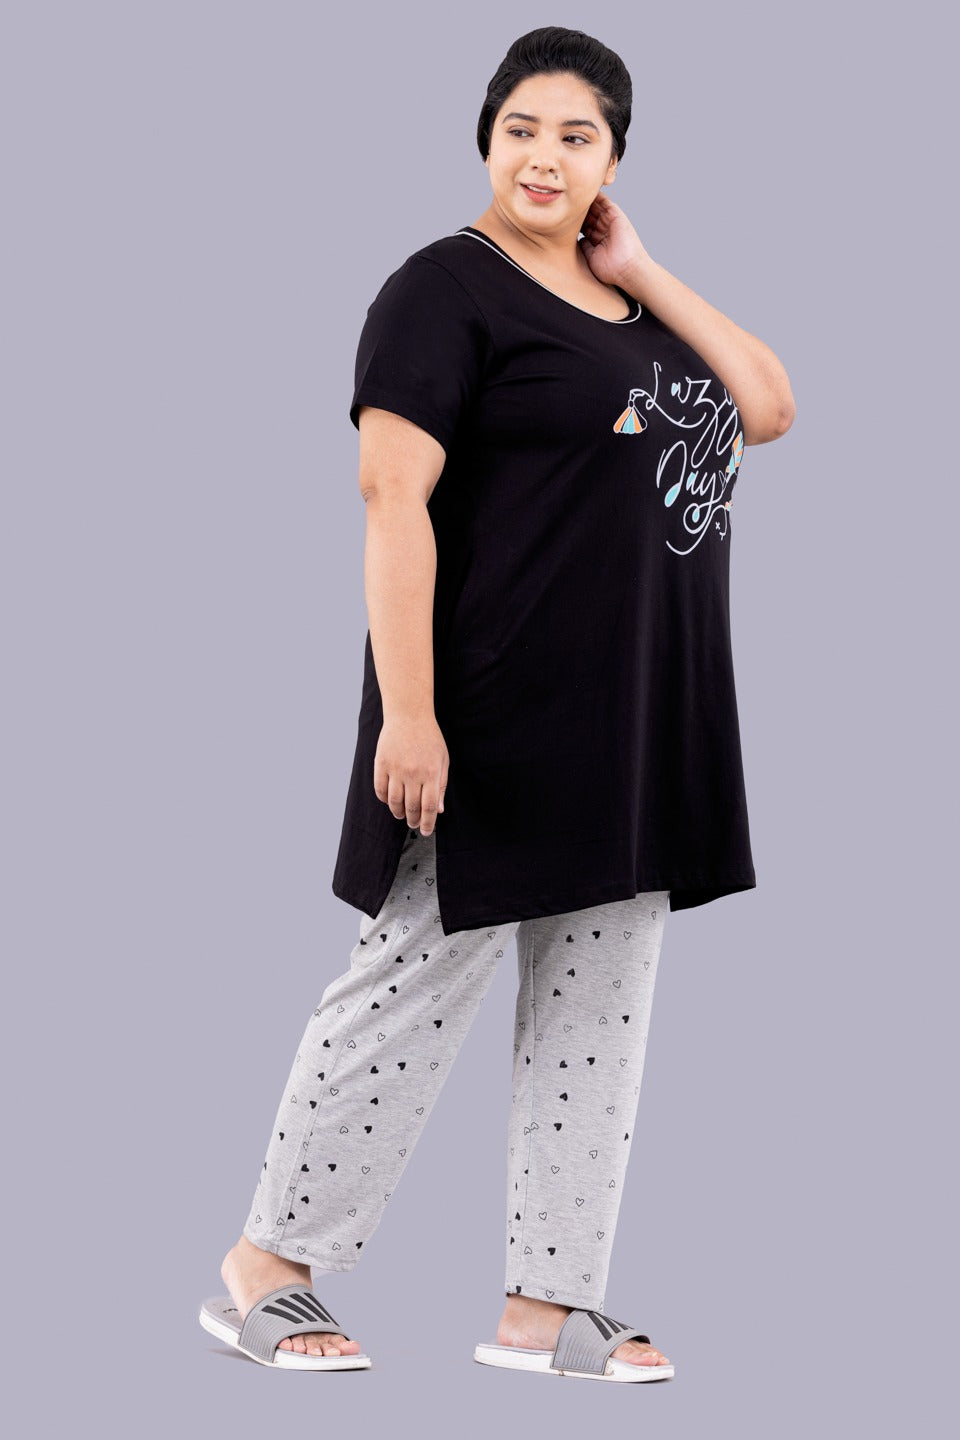 Stylish Cotton Nightsuit for Women Pack Of 2 (Long Top and Pyjama Set) online in India